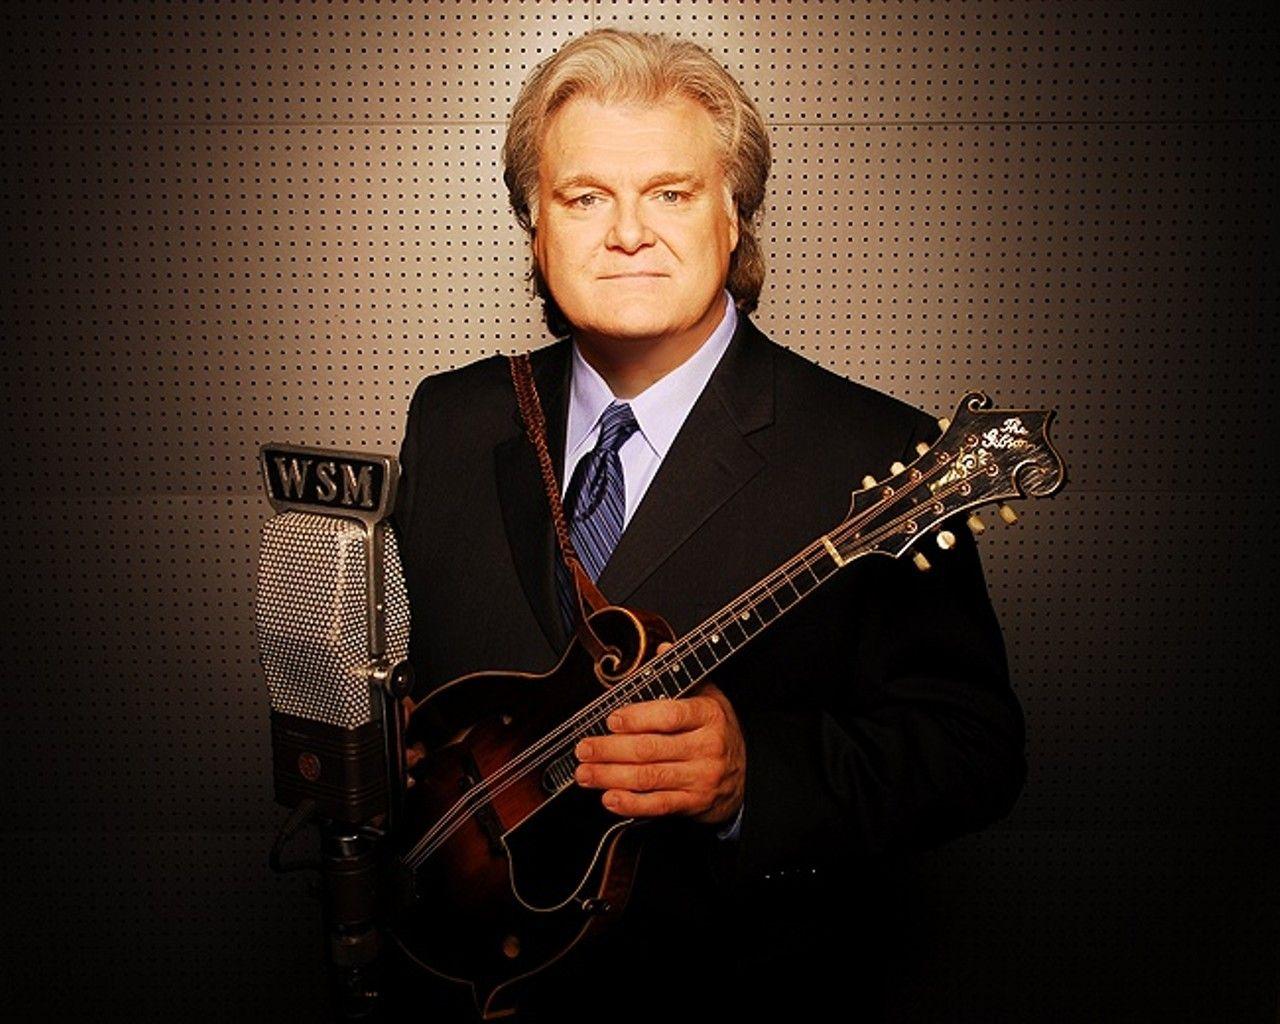 Ricky Skaggs honors the old country songs. Features. Charleston